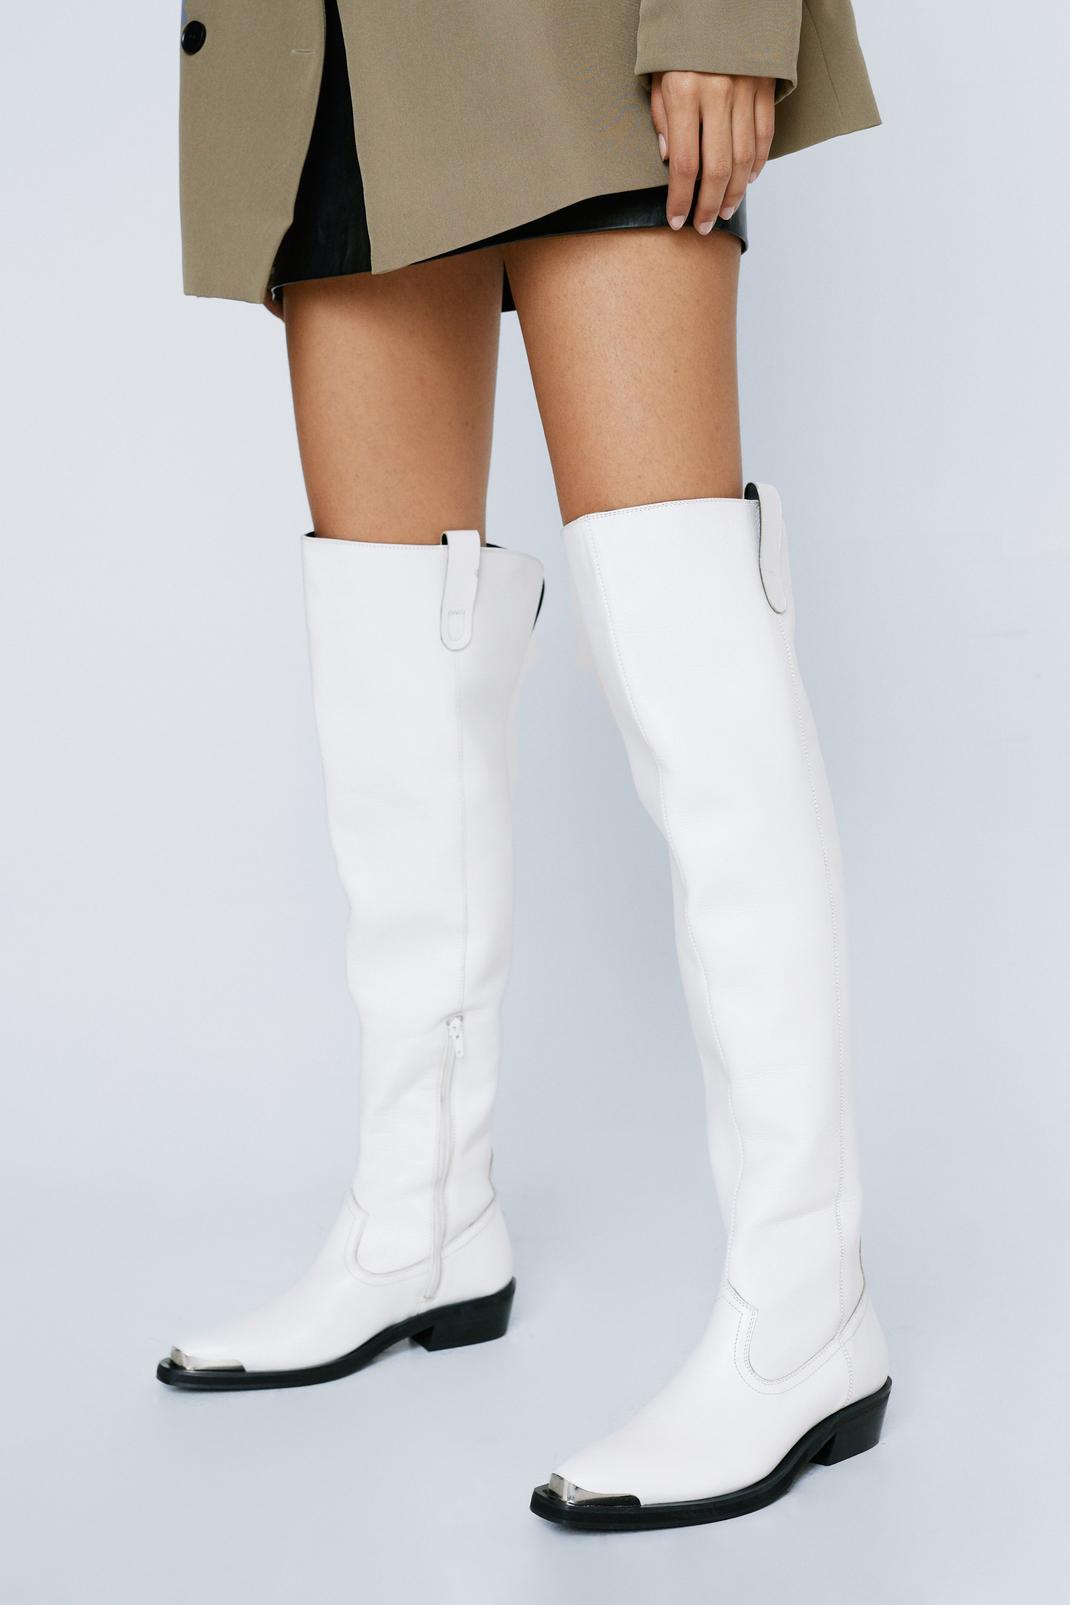 Oh Roux básico Real Leather Thigh High Metal Western Boots | Nasty Gal